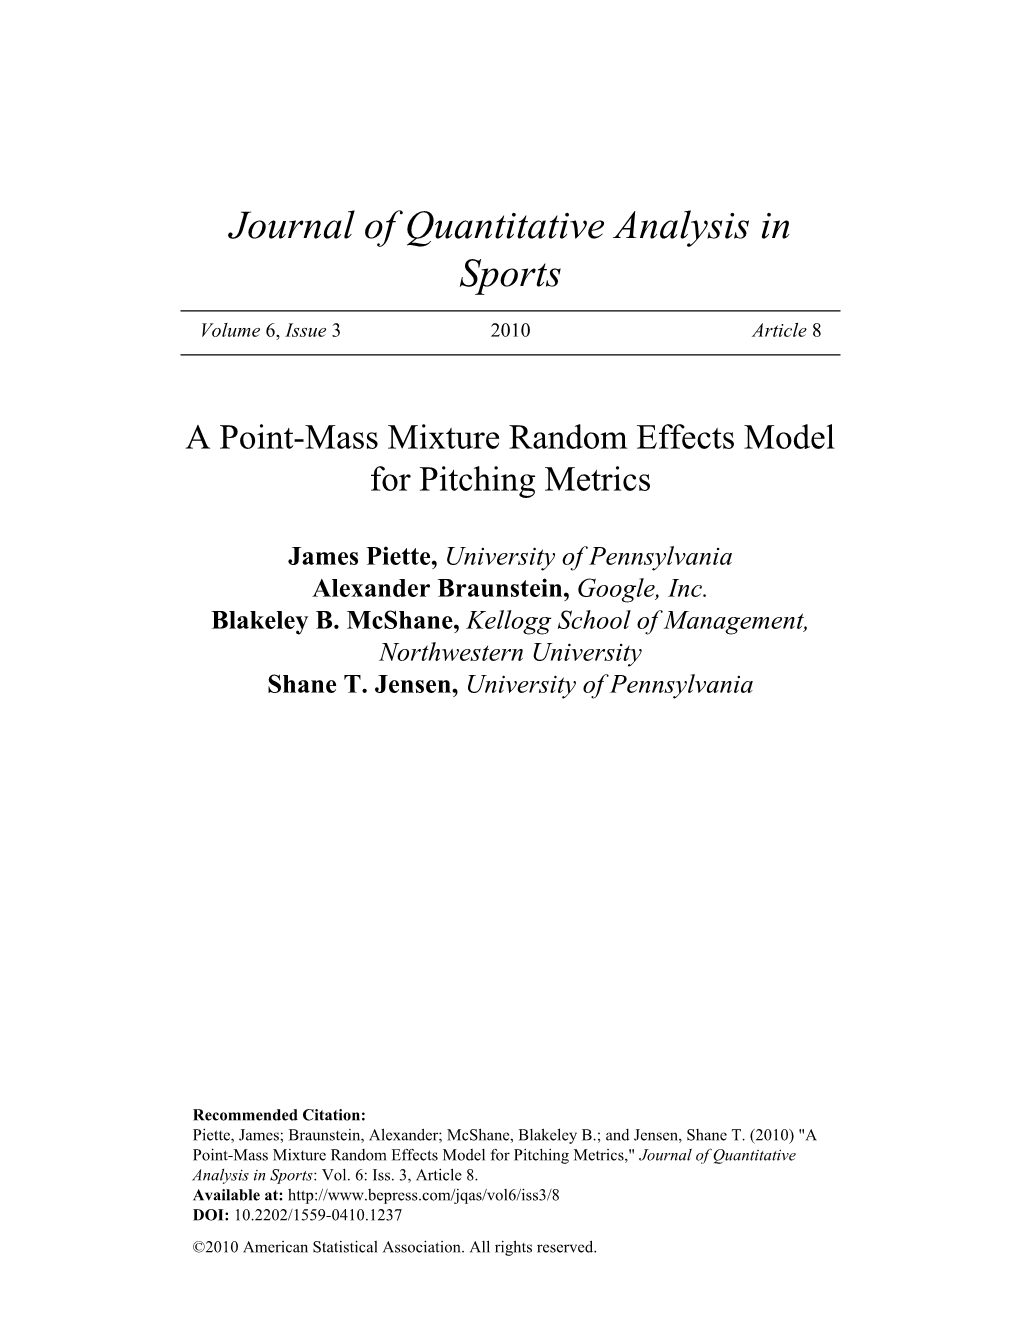 A Point-Mass Mixture Random Effects Model for Pitching Metrics